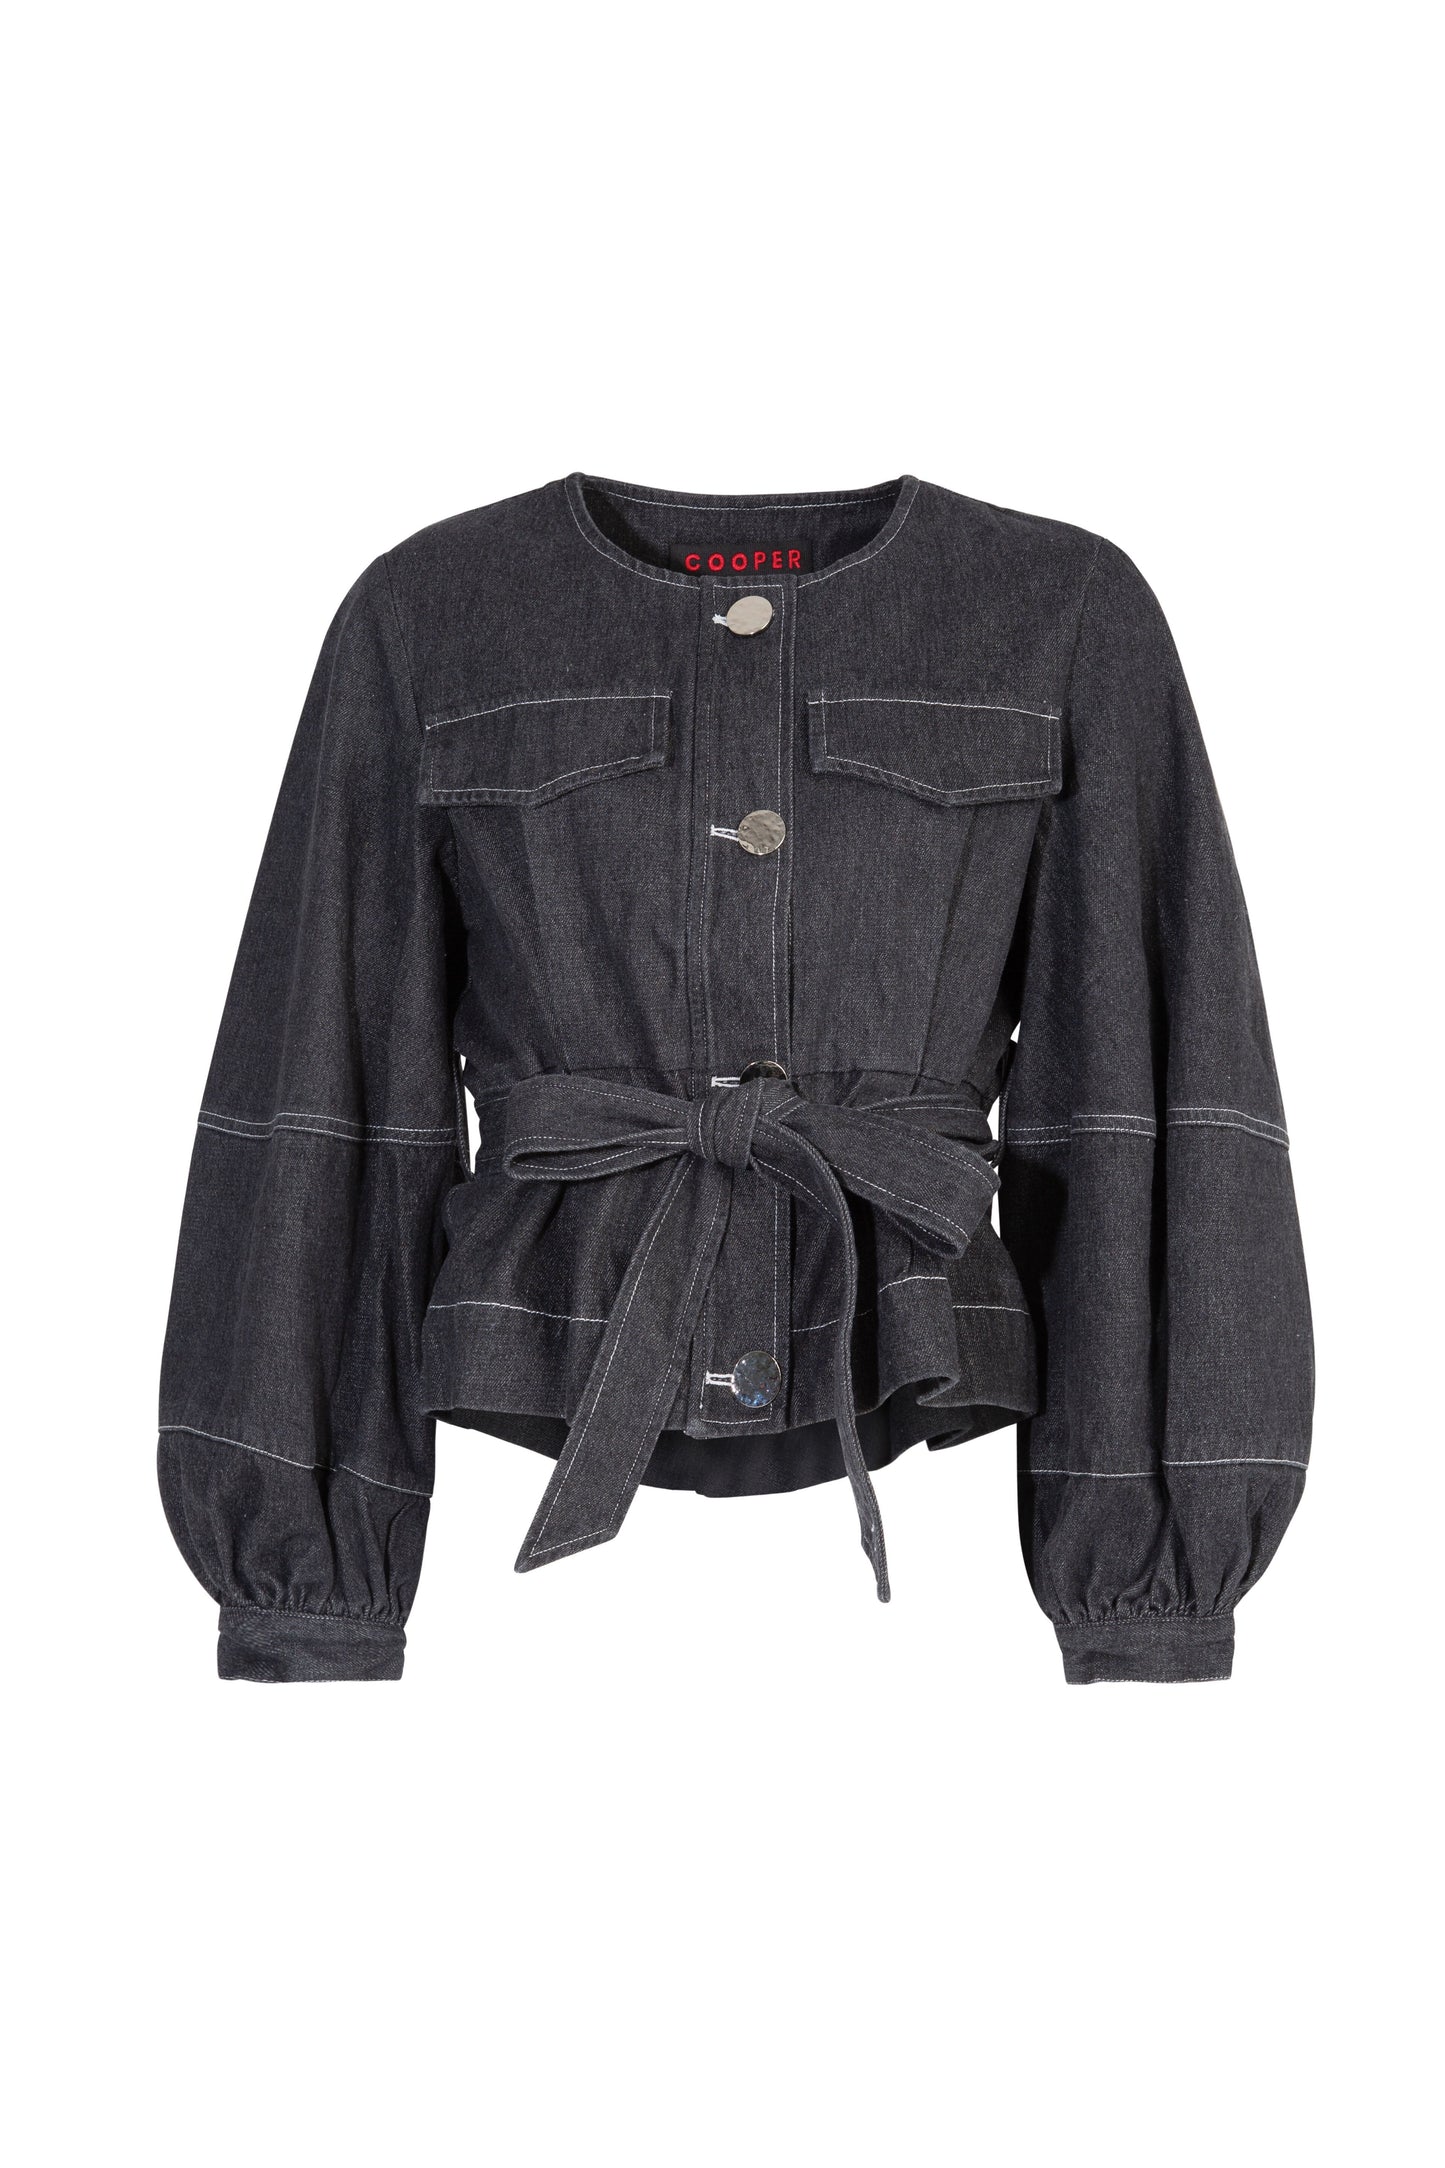 COOPER HEART UPON MY SLEEVE JACKET - BLACK - THE VOGUE STORE